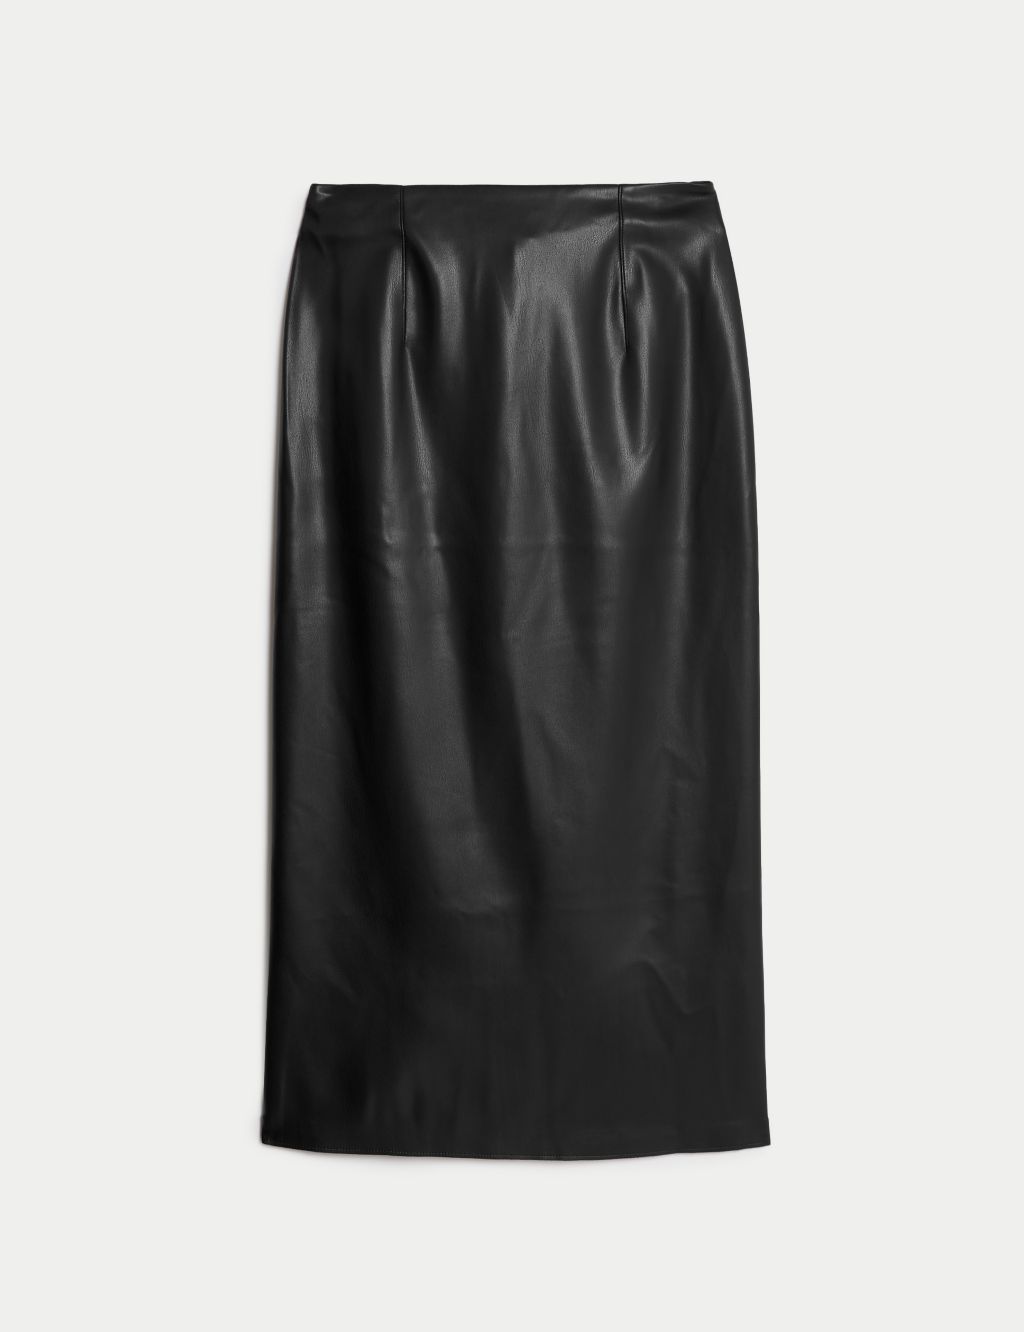 Leather Look Midaxi Pencil Skirt image 2